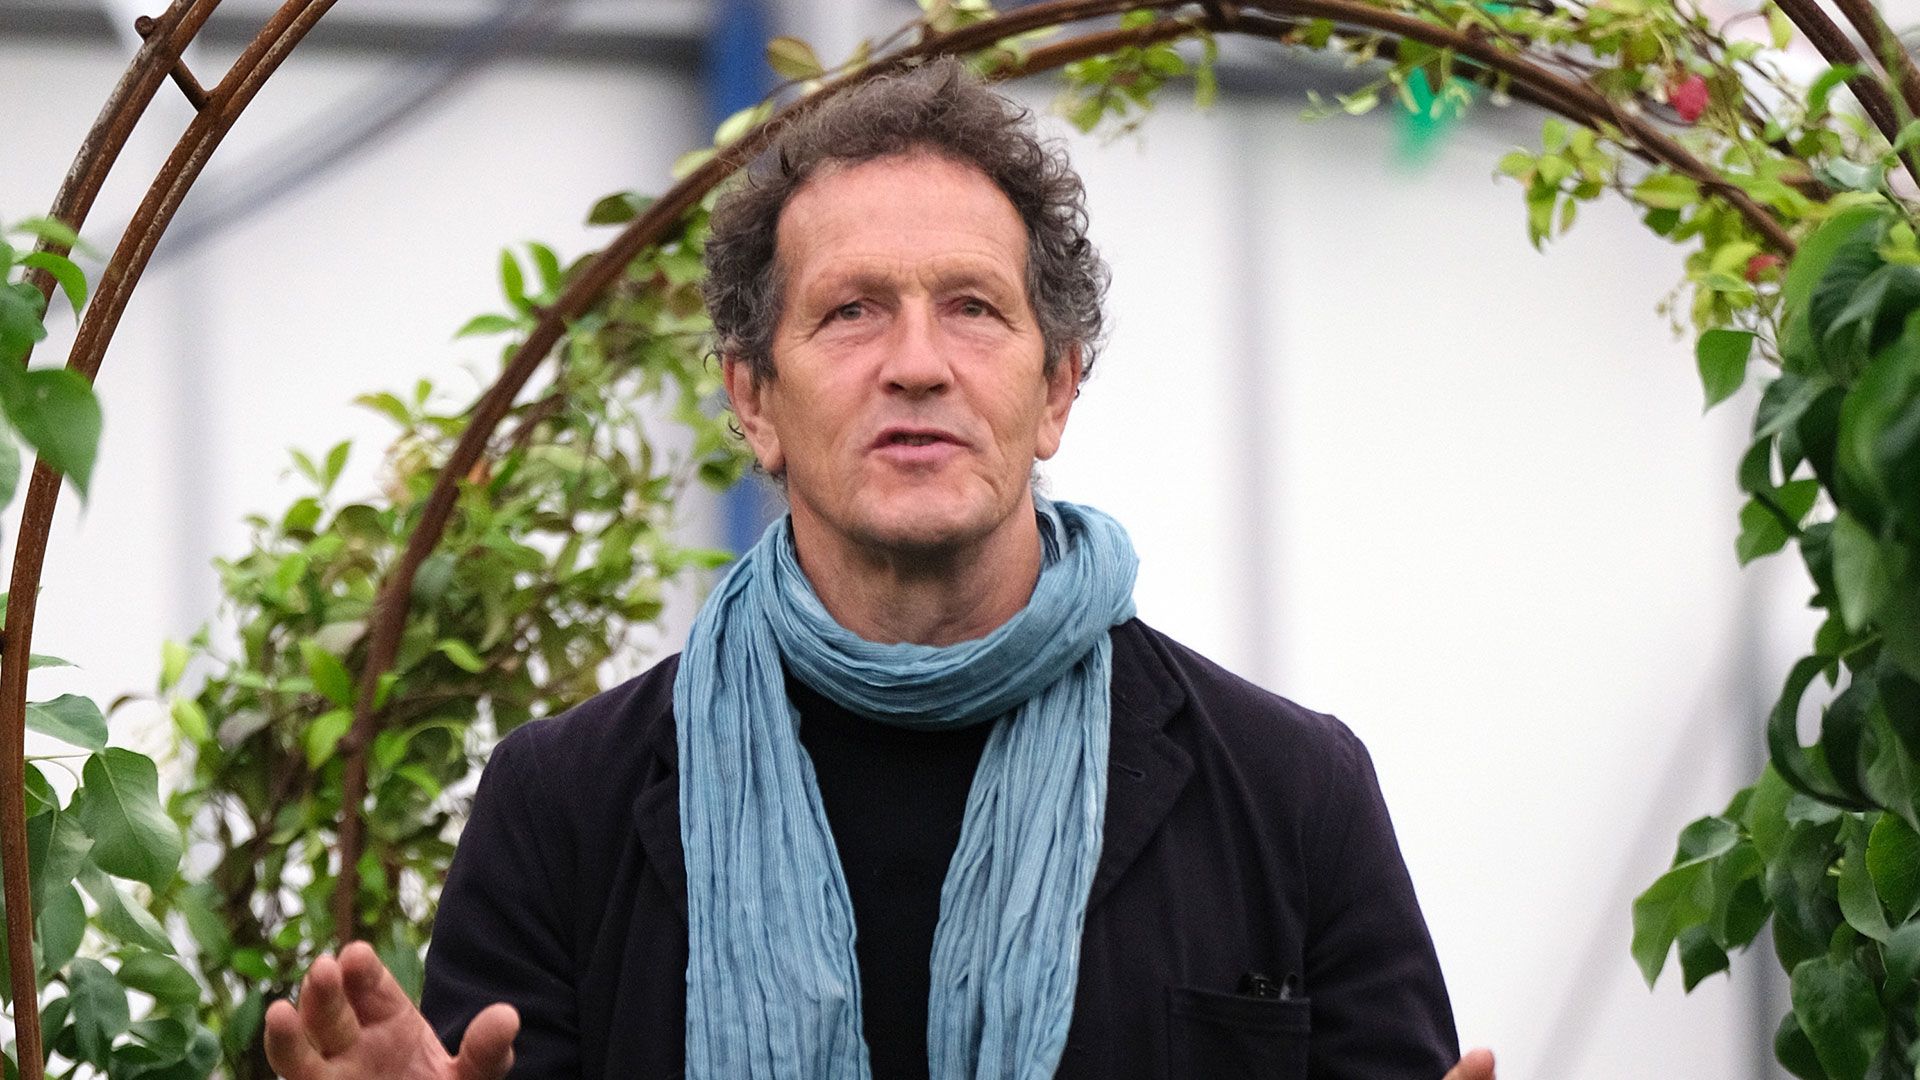 Monty Don at the BBC Gardeners World Live and Good Food Show Summer 2019 